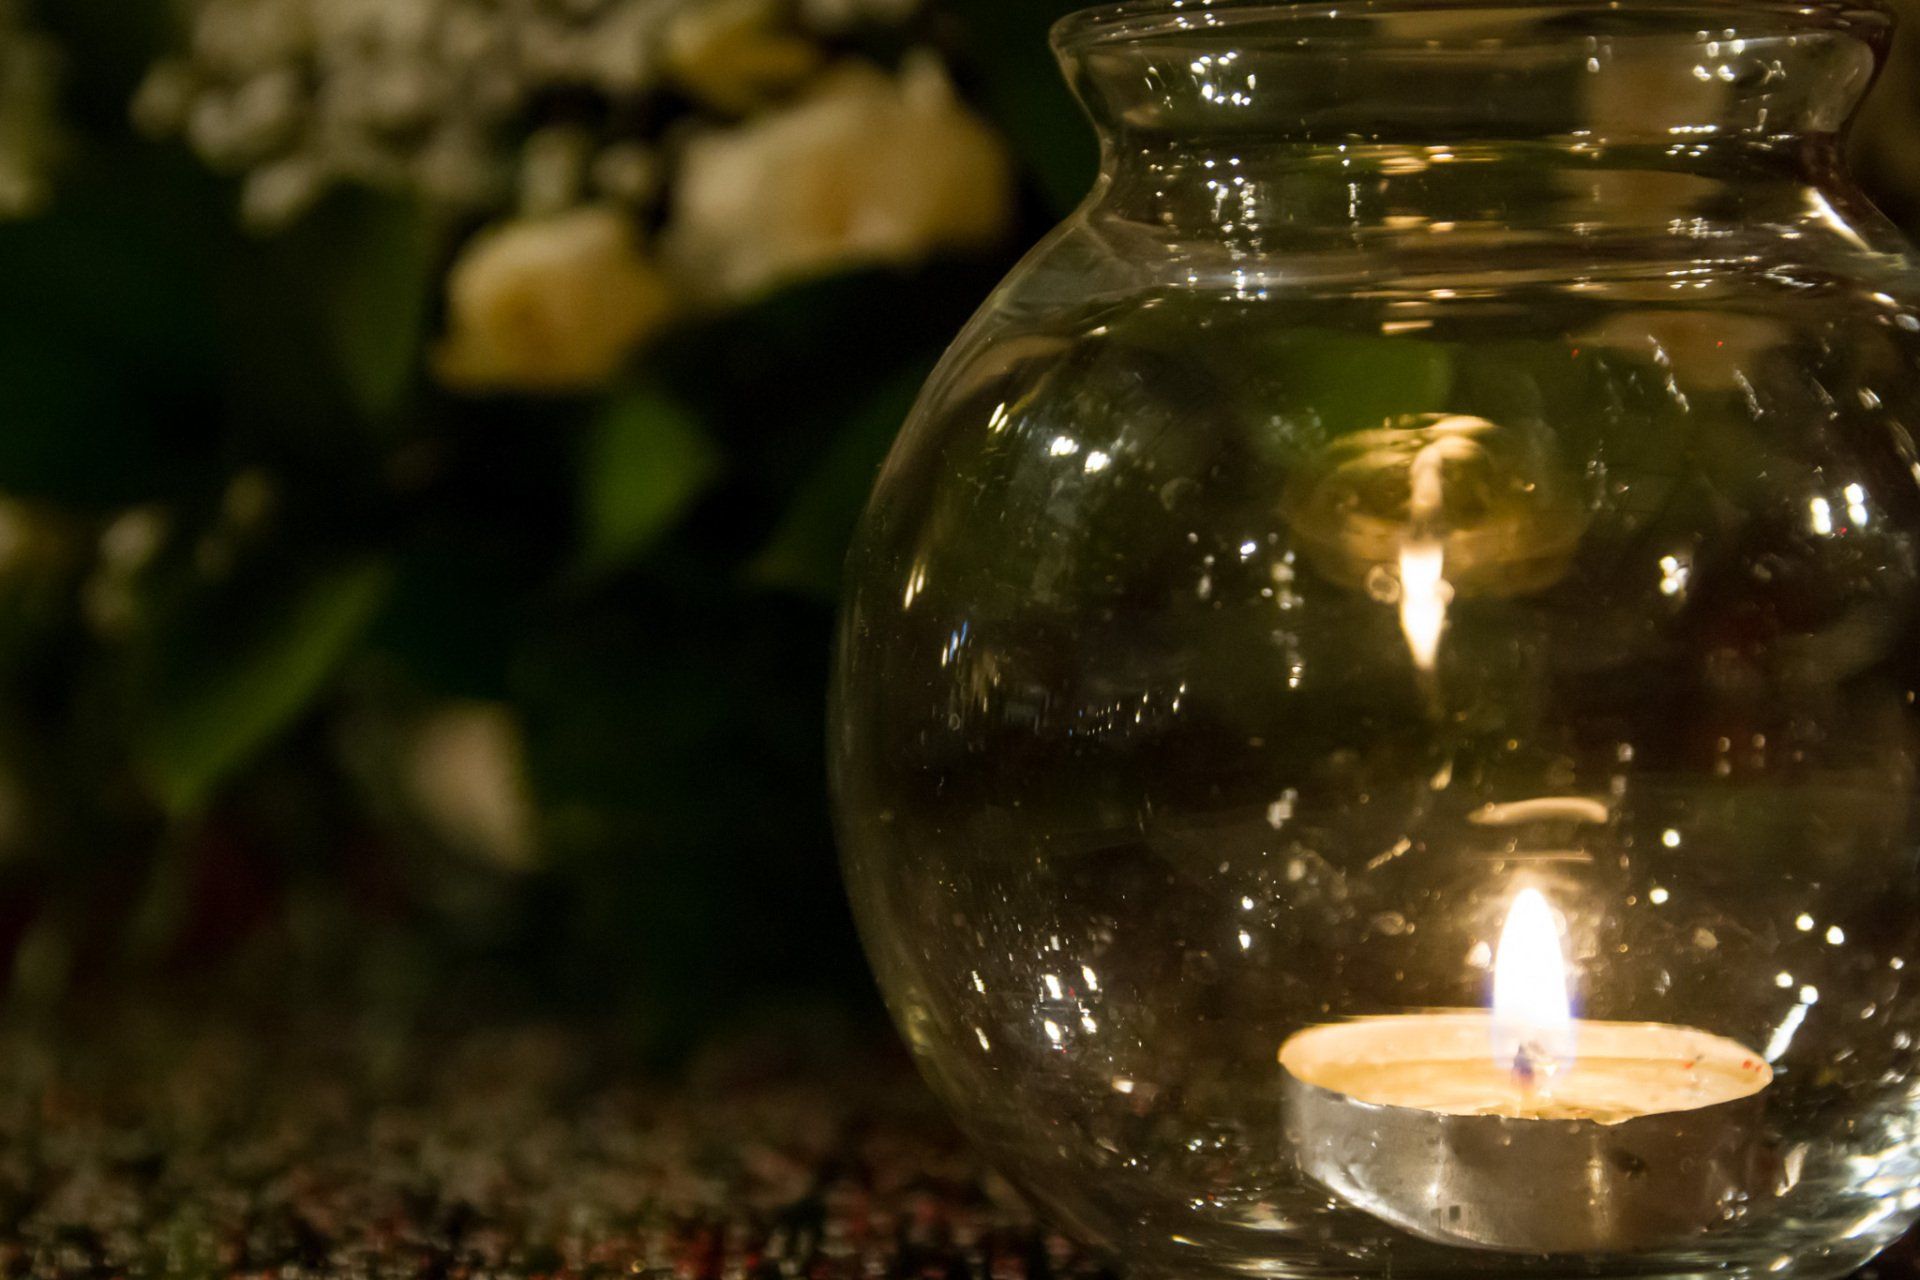 A close up view of a table centerpiece showing flowers and a candle in a clear glass globe